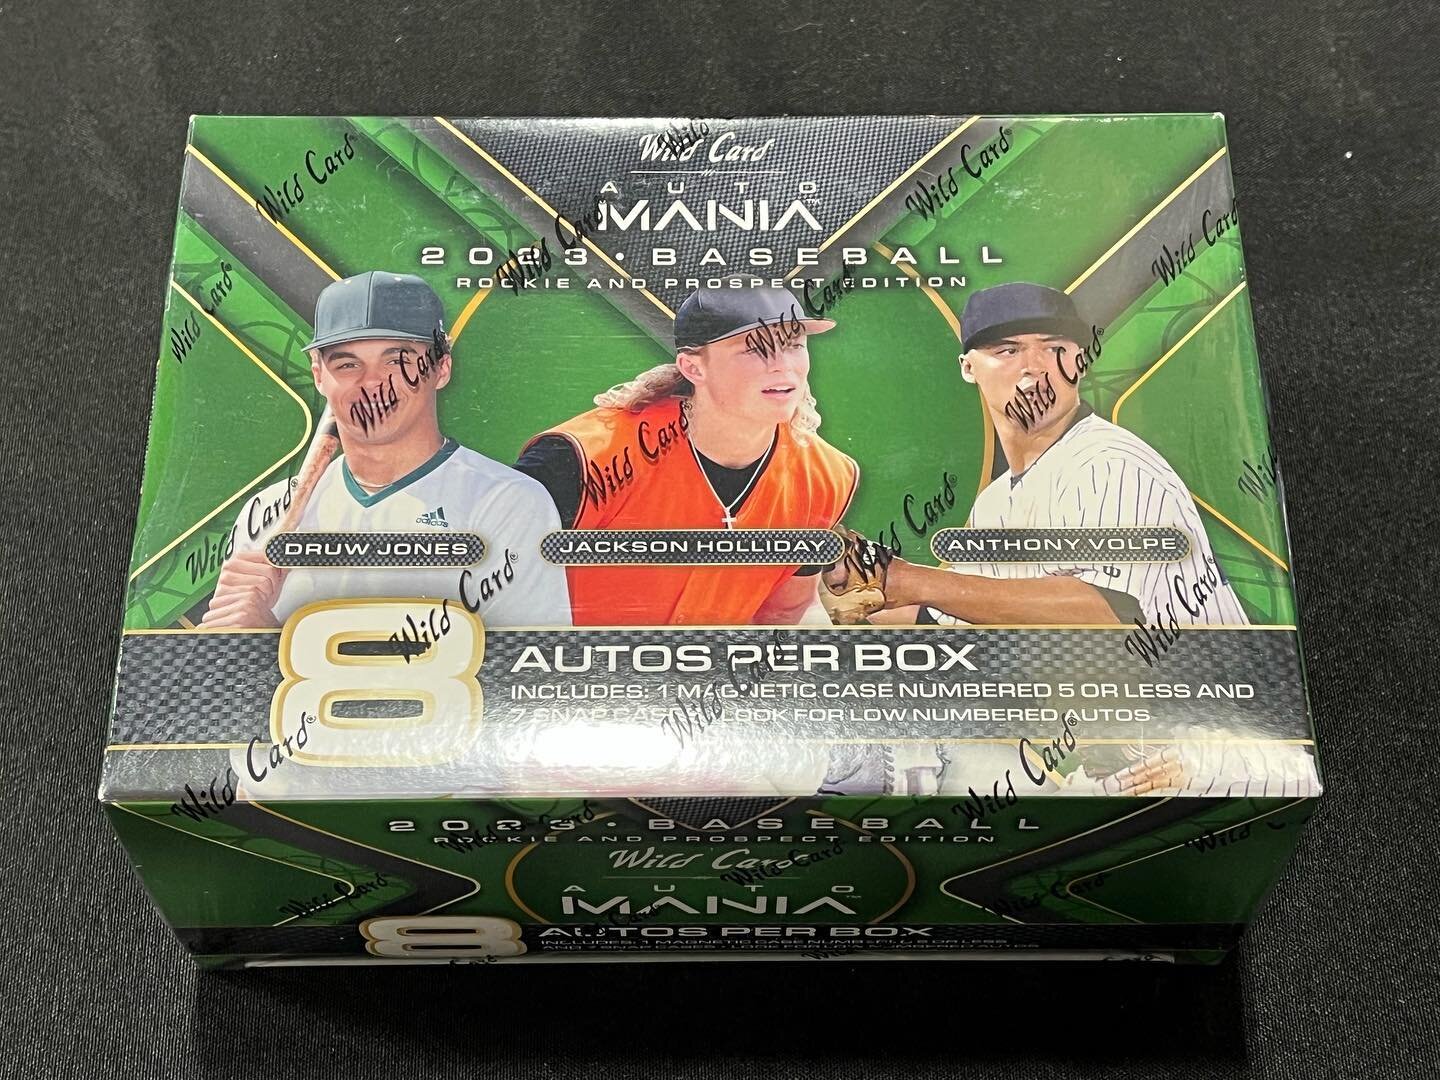 This weekend at the @arizonastatecardshow I picked up a box of 2023 Wild Card Auto Mania Baseball. It&rsquo;s a really nice product and a fun rip! 

A new post about it will be coming soon to Biceballcards.com! (Possibly a video of the break to @boxs